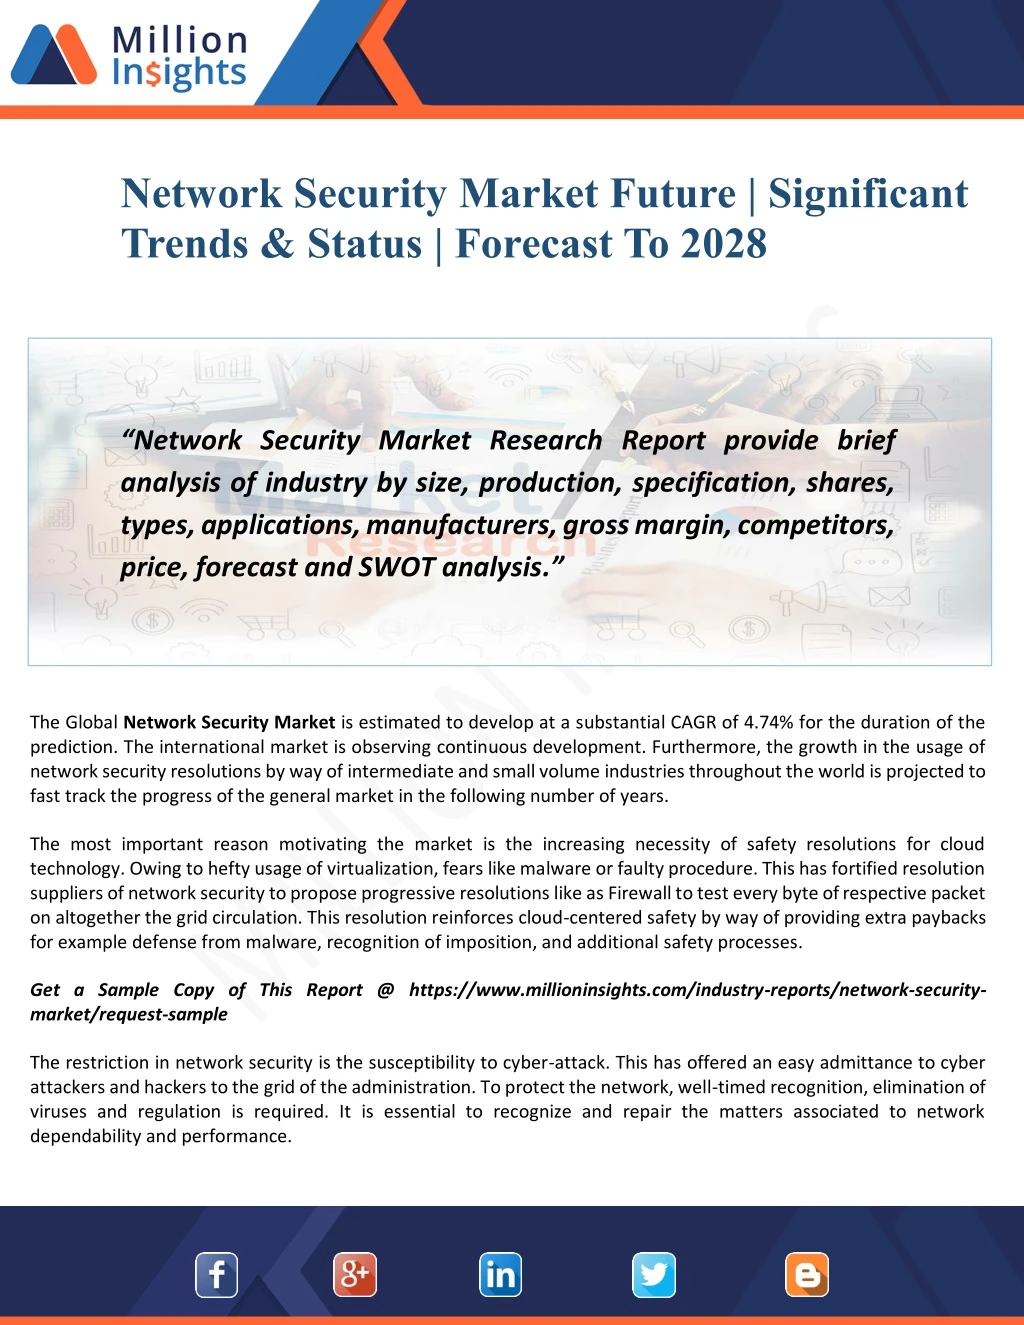 network security market future significant trends